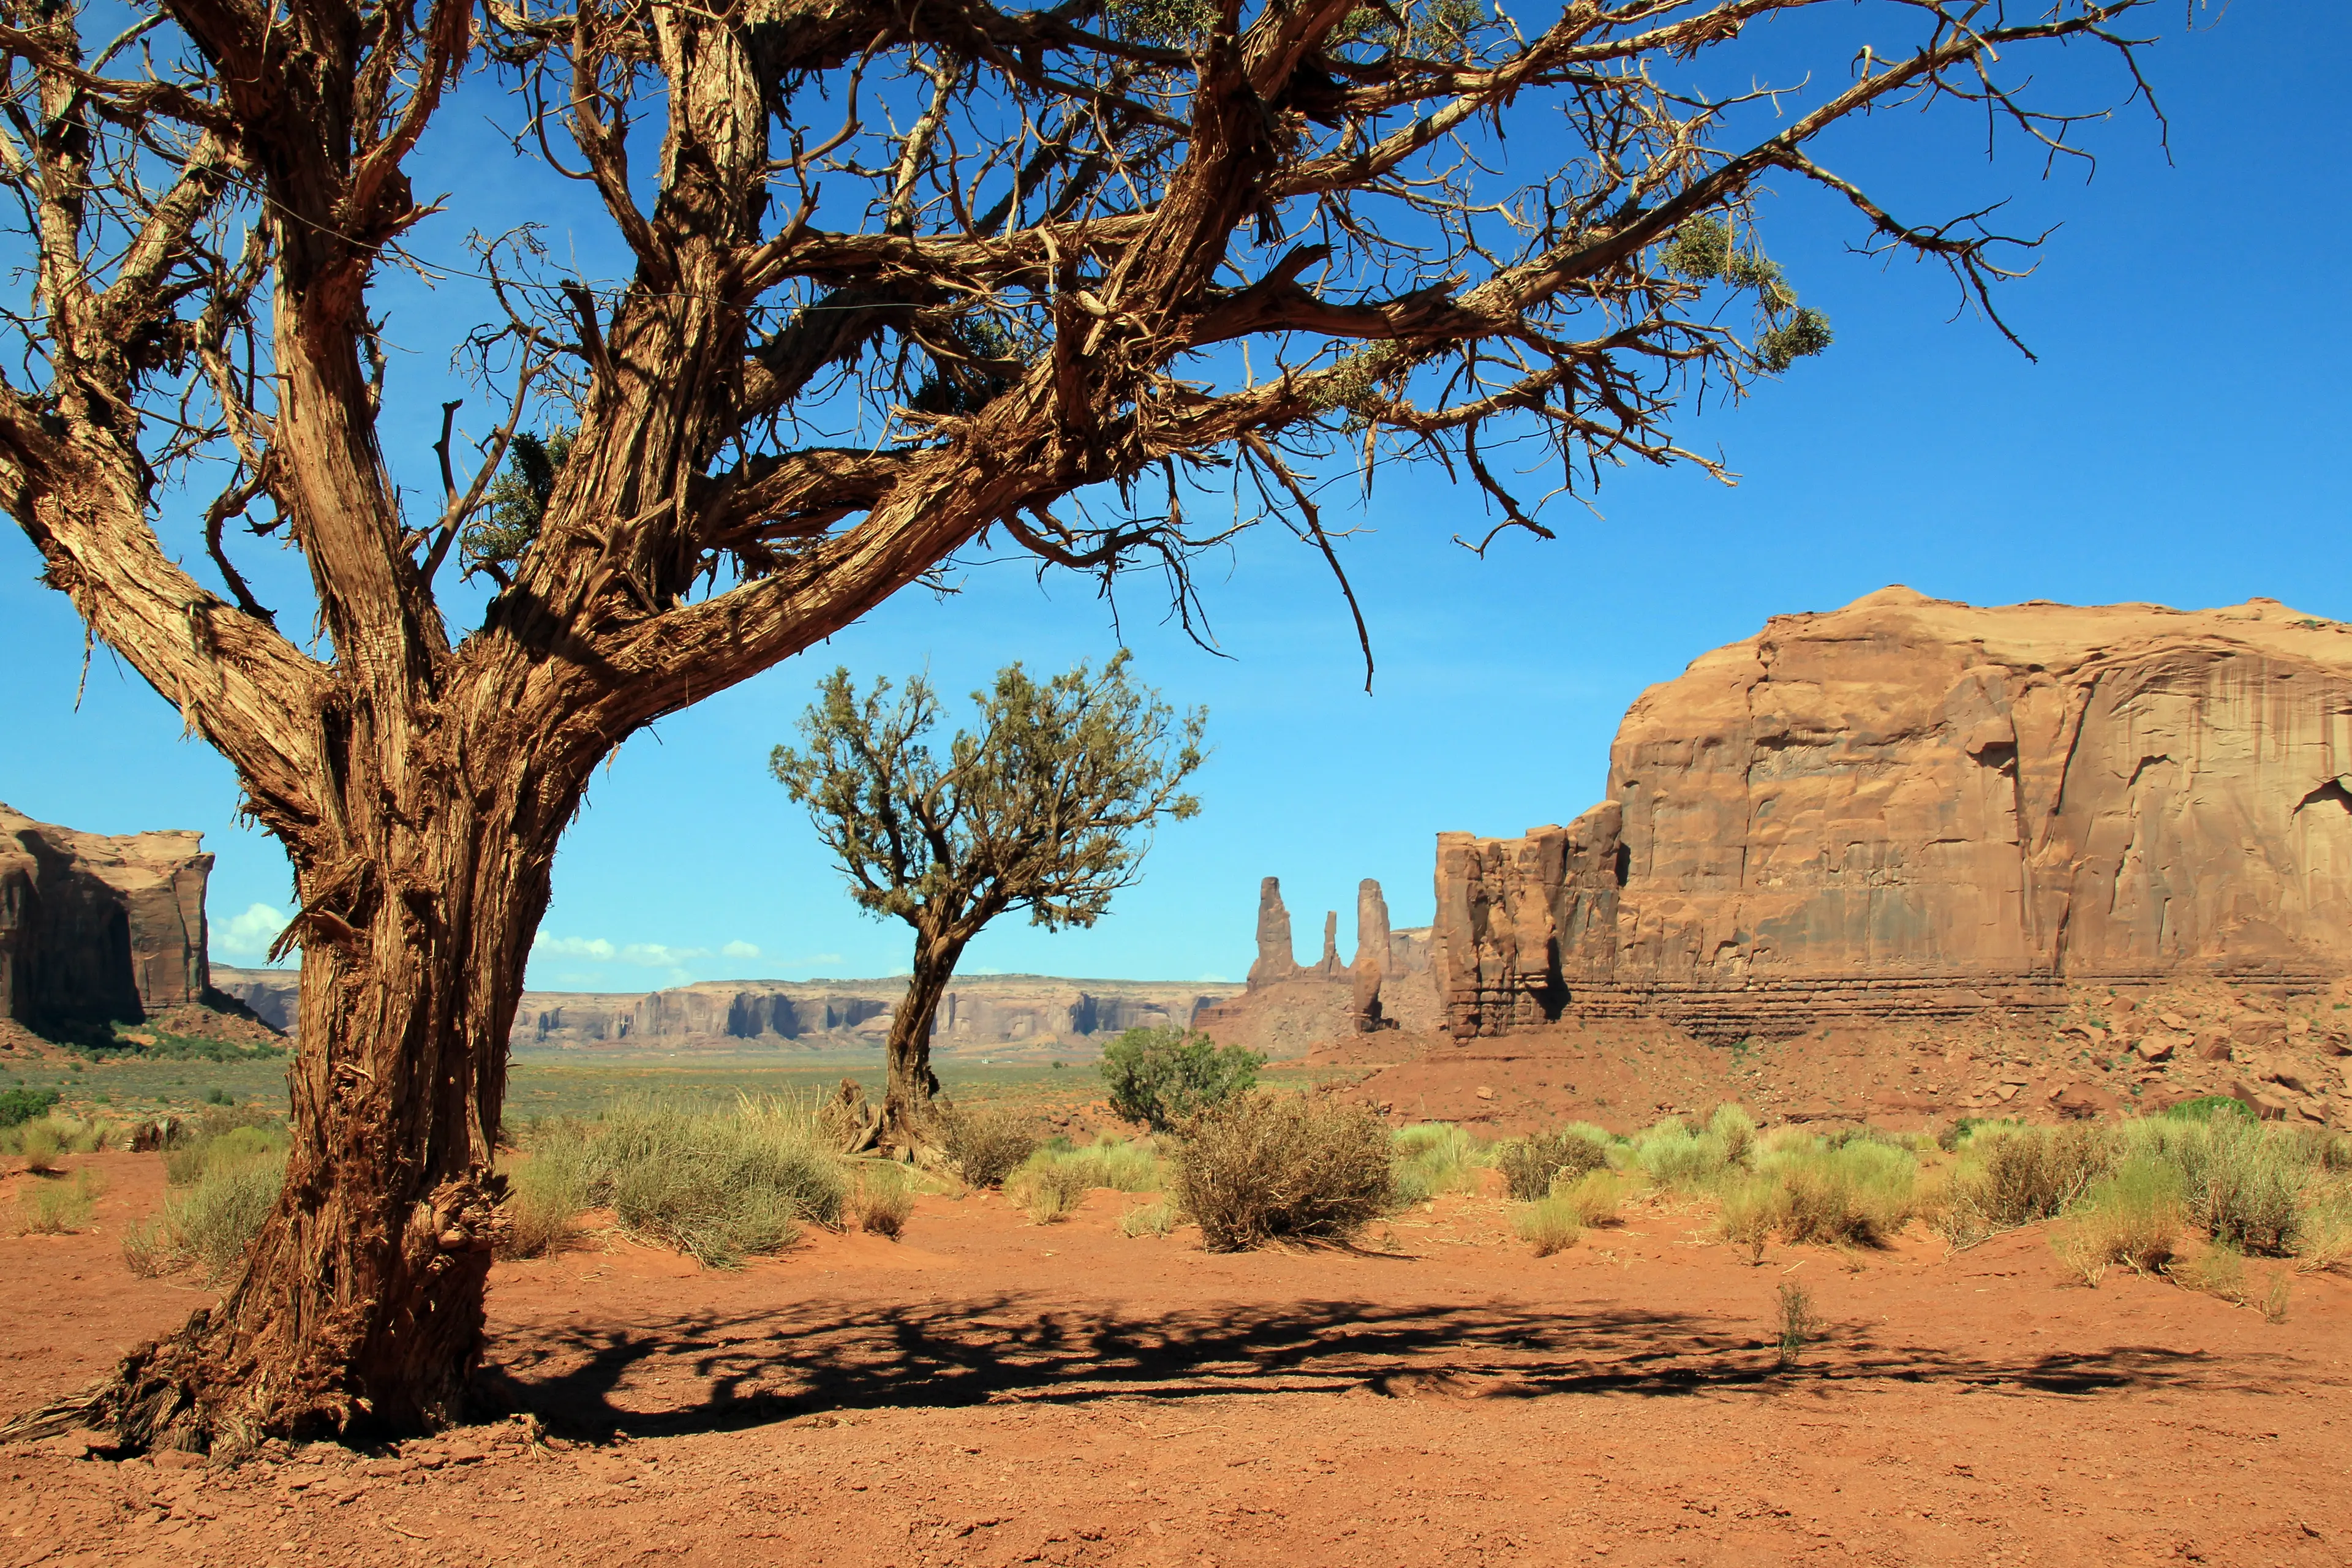 3-Day Monument Valley Adventure: Sightseeing & Outdoor Activities with Friends